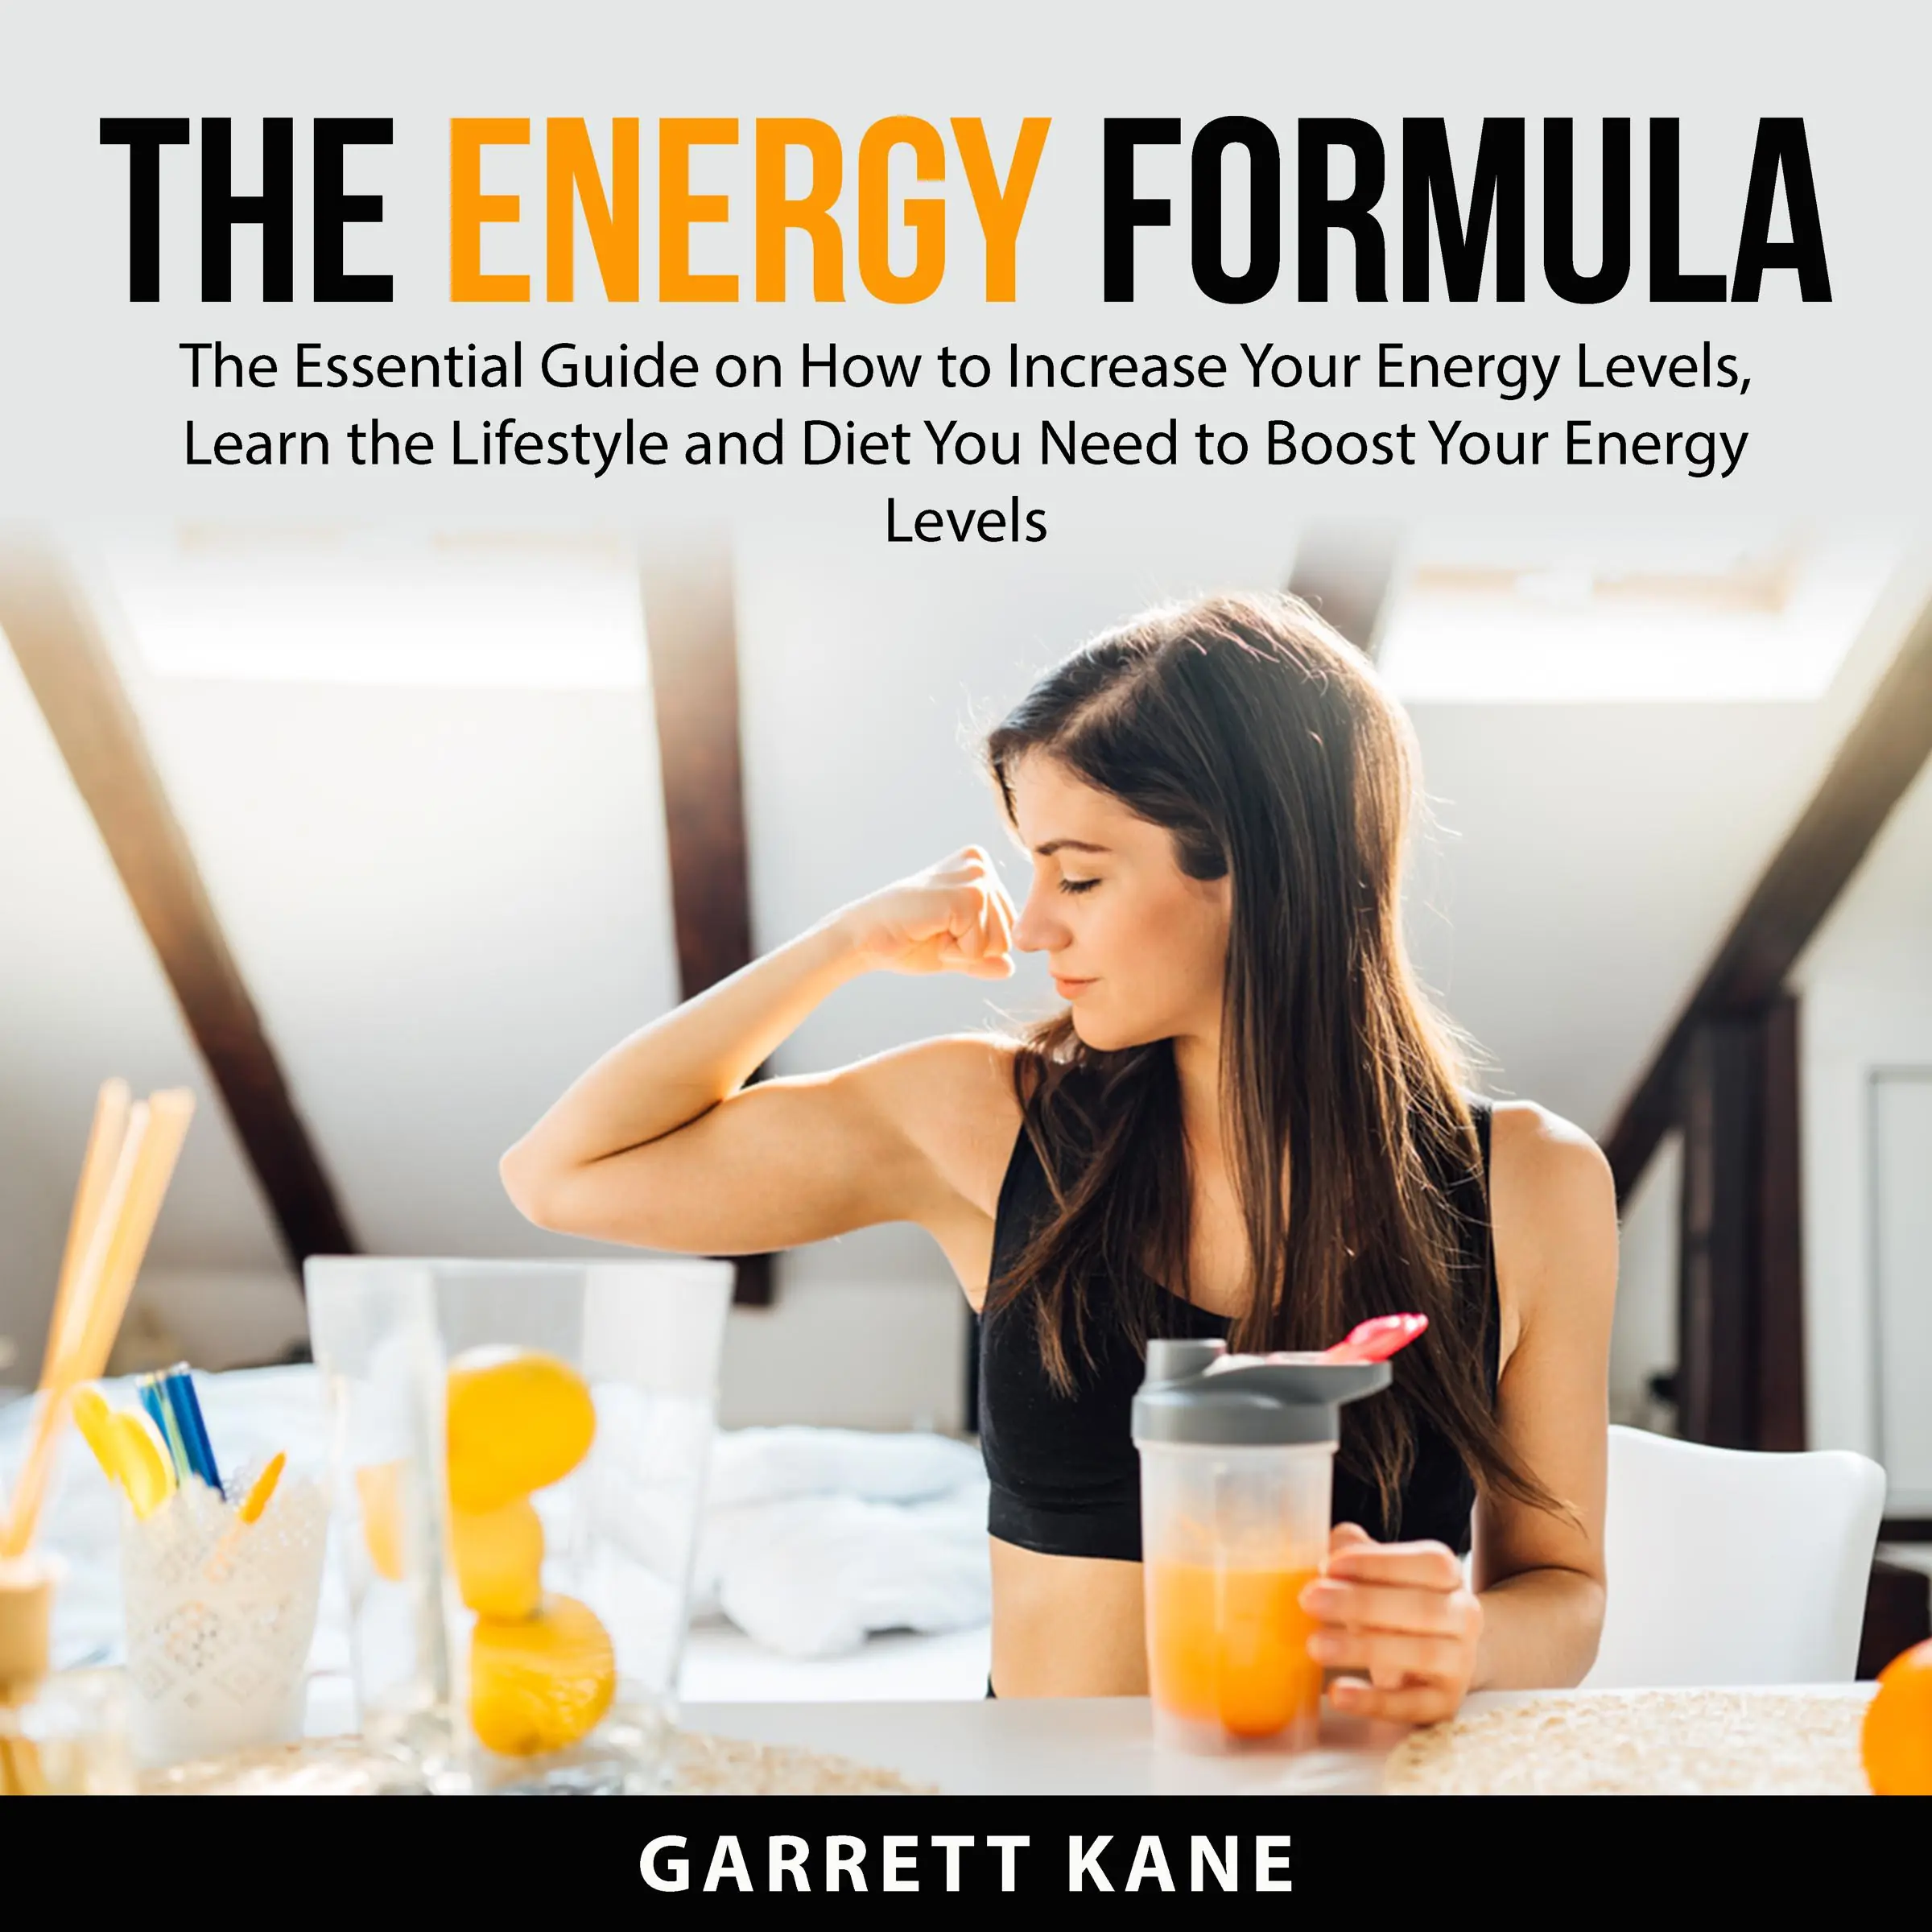 The Energy Formula: The Essential Guide on How to Increase Your Energy Levels, Learn the Lifestyle and Diet You Need to Boost Your Energy Levels Audiobook by Garrett Kane